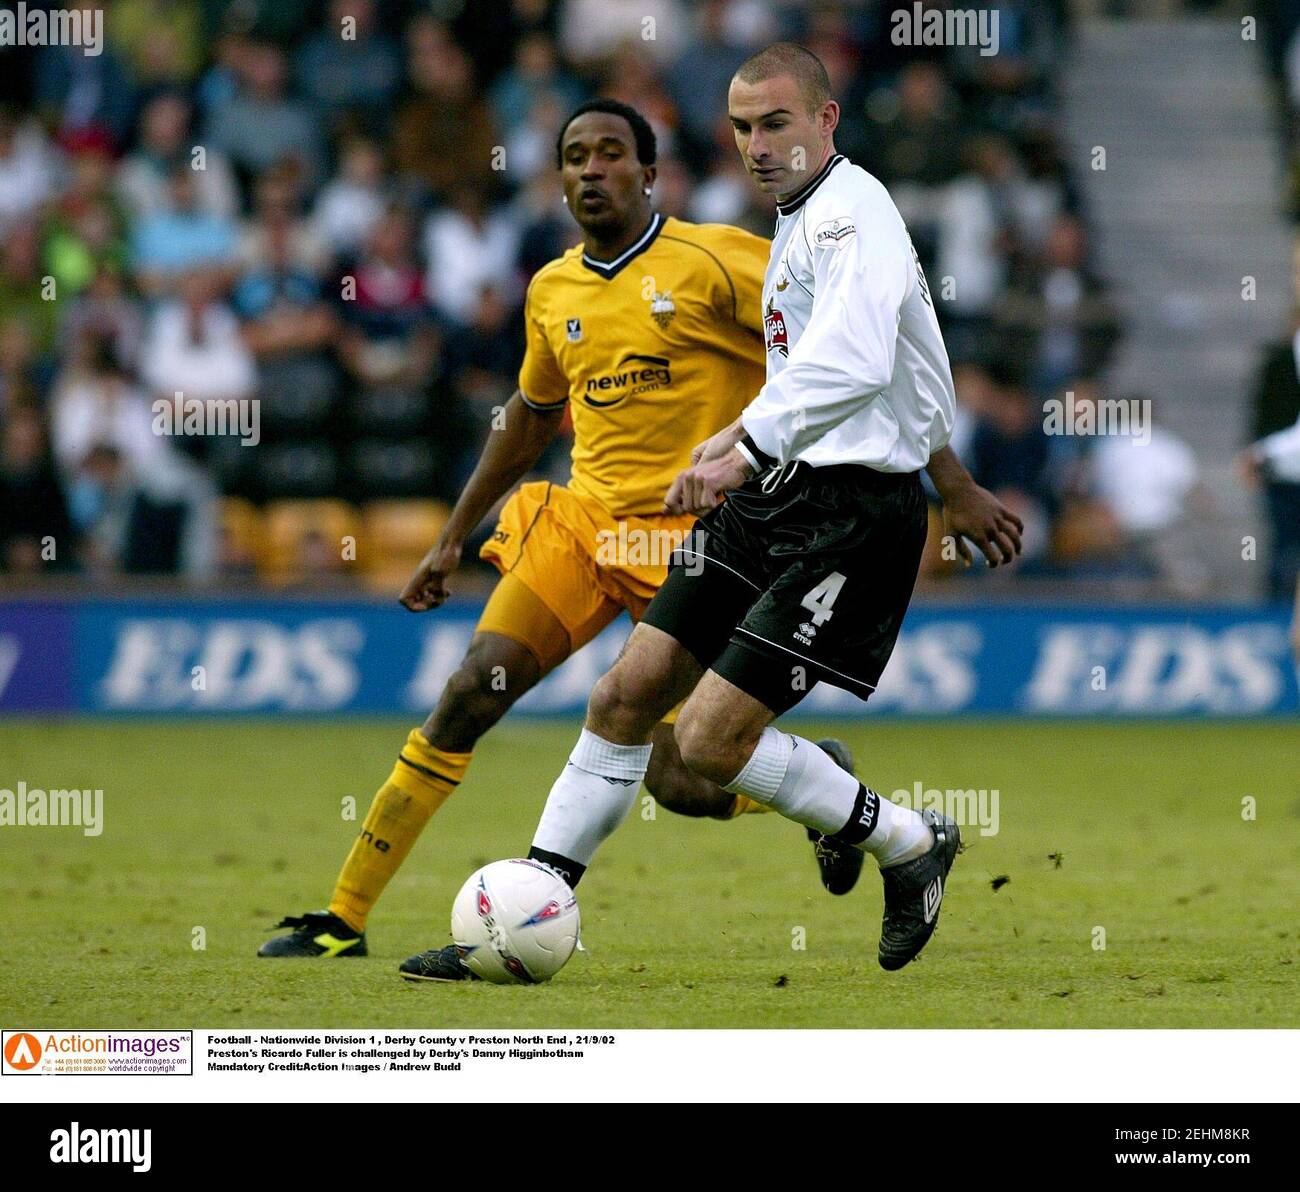 Football - Nationwide Division 1 , Derby County v Preston North End , 21/9/02  Preston's Ricardo Fuller is challenged by Derby's Danny Higginbotham  Mandatory Credit:Action Images / Andrew Budd Stock Photo